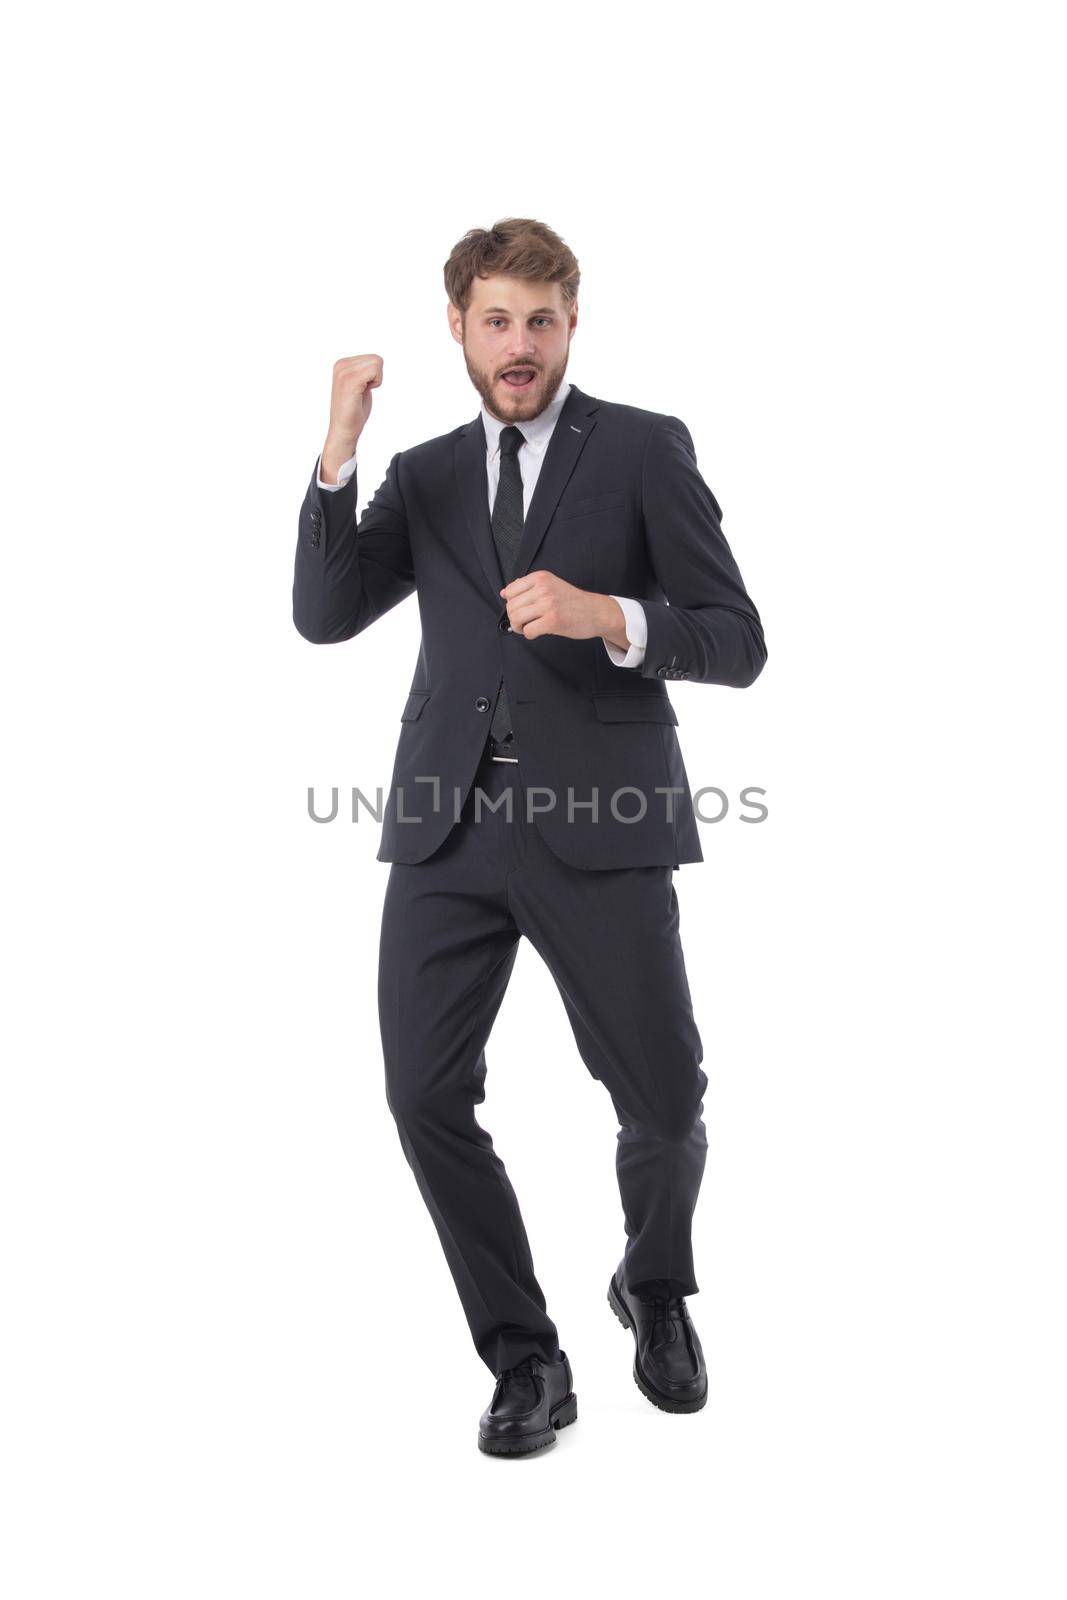 Cheering successful business man holding fists full length studio portrait isolated on white background